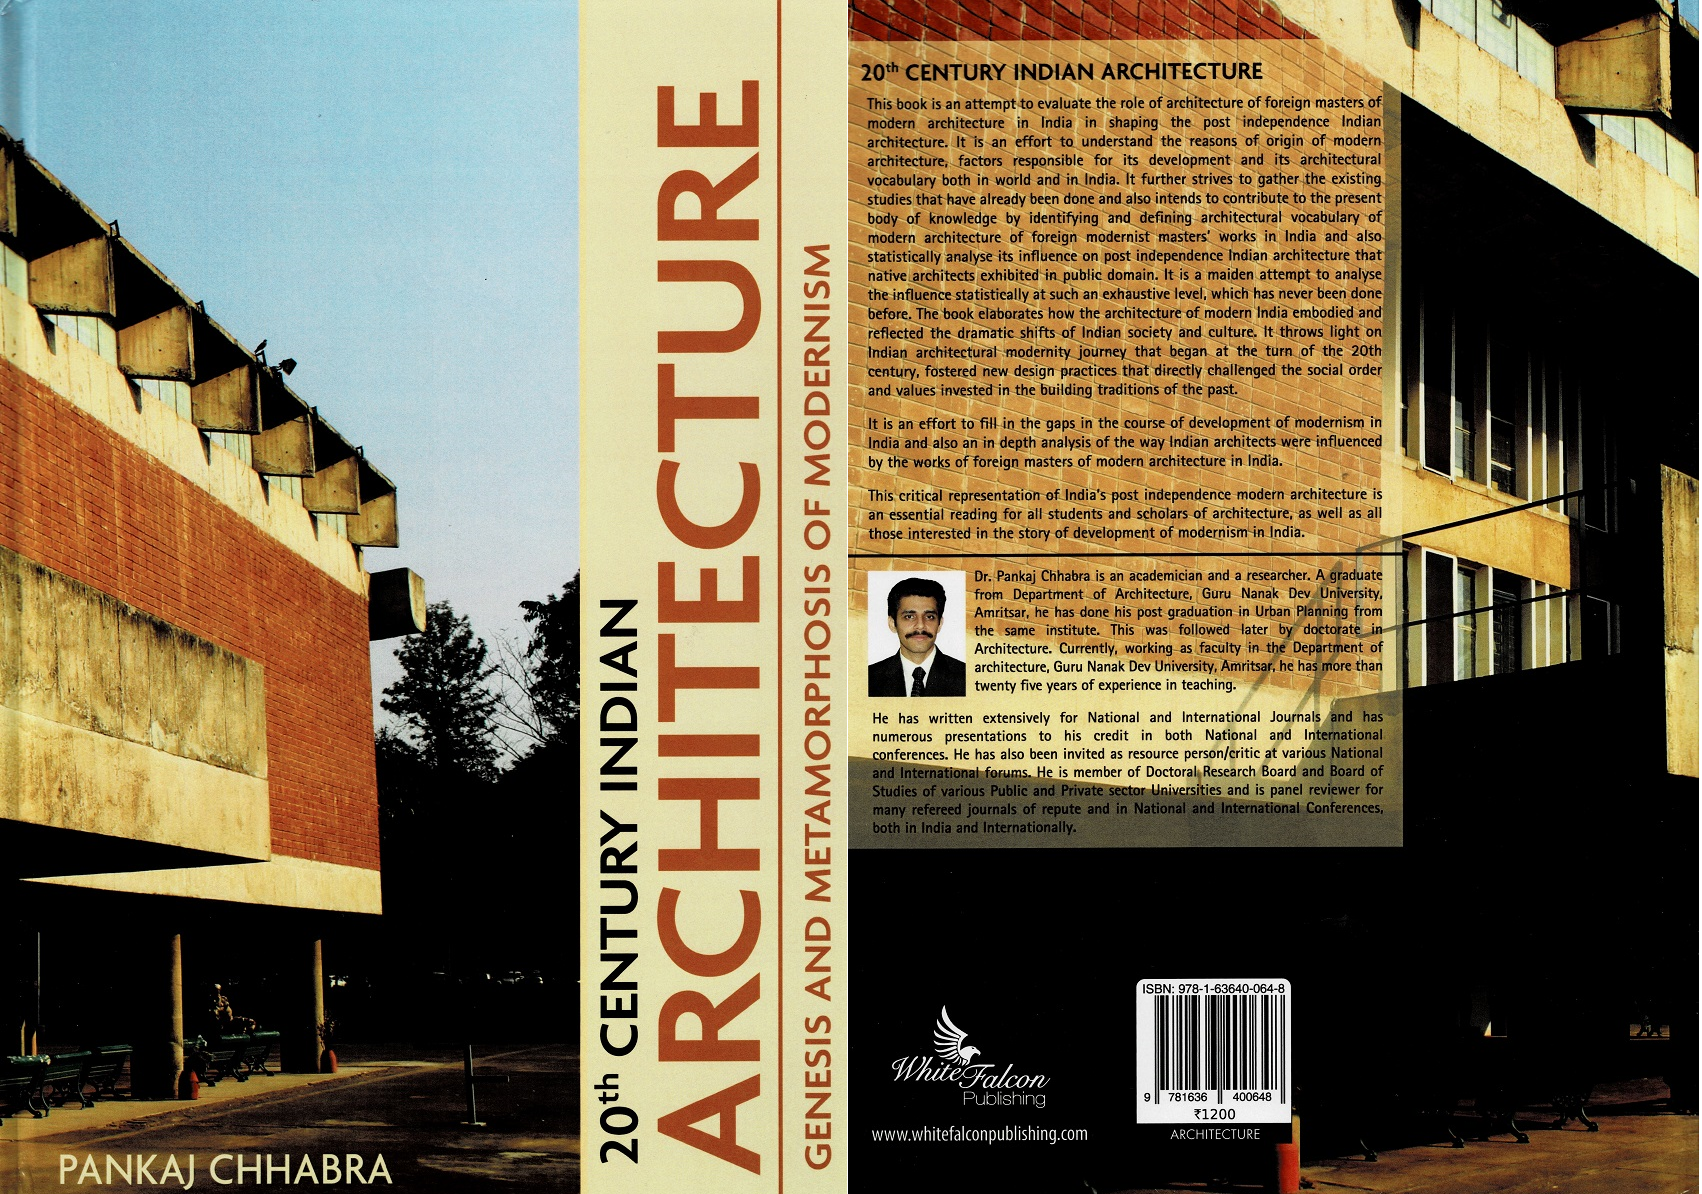 Book: 20th CENTURY INDIAN ARCHITECTURE, authored by Pankaj Chhabra, Reviewed by Sarbjit Bahga